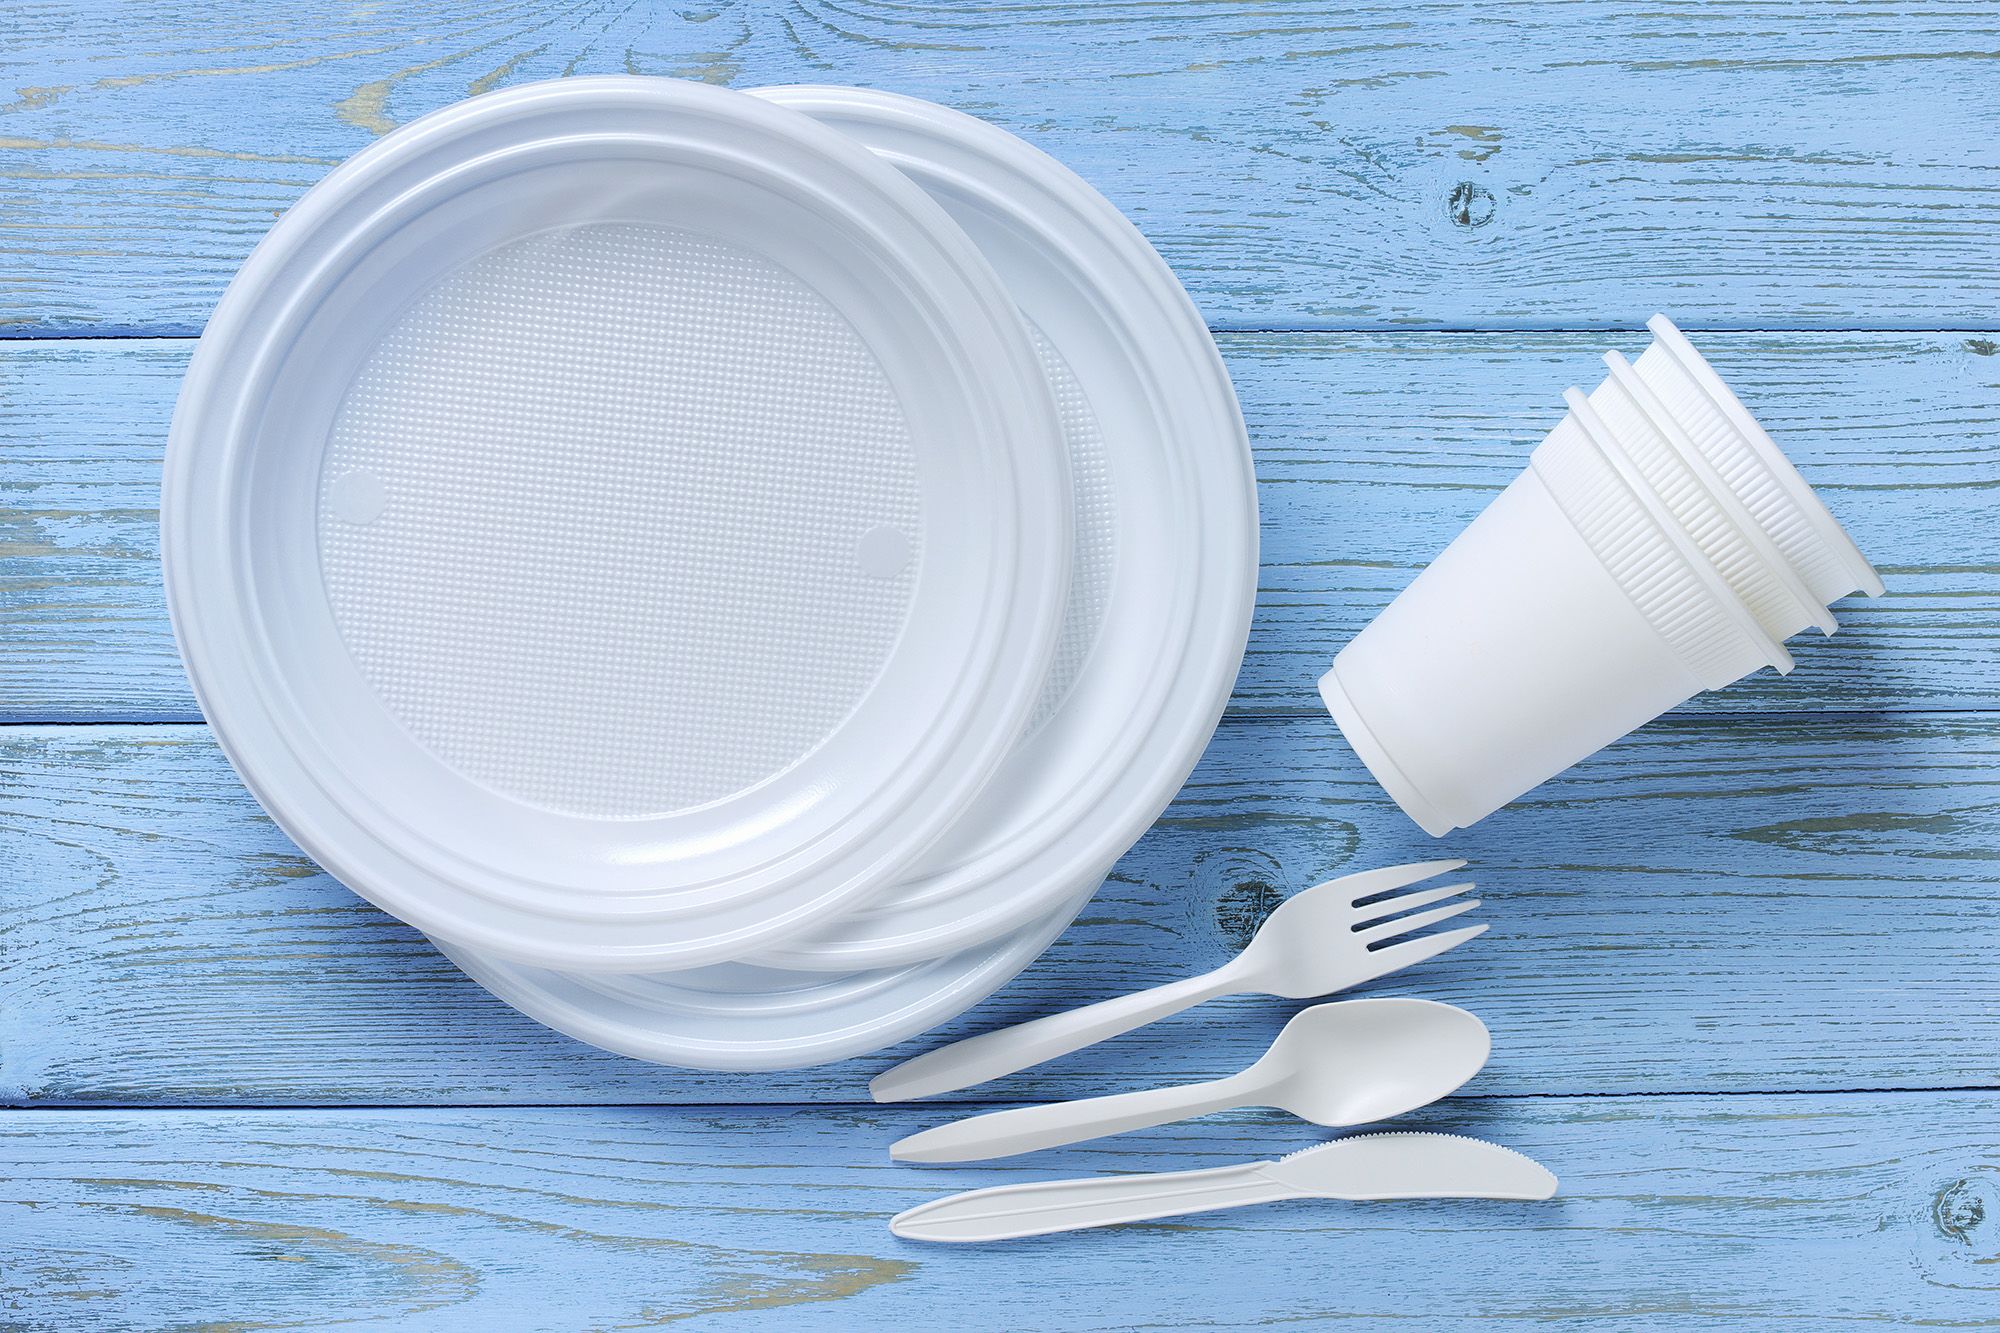 England to ban single-use plastic cutlery and plates